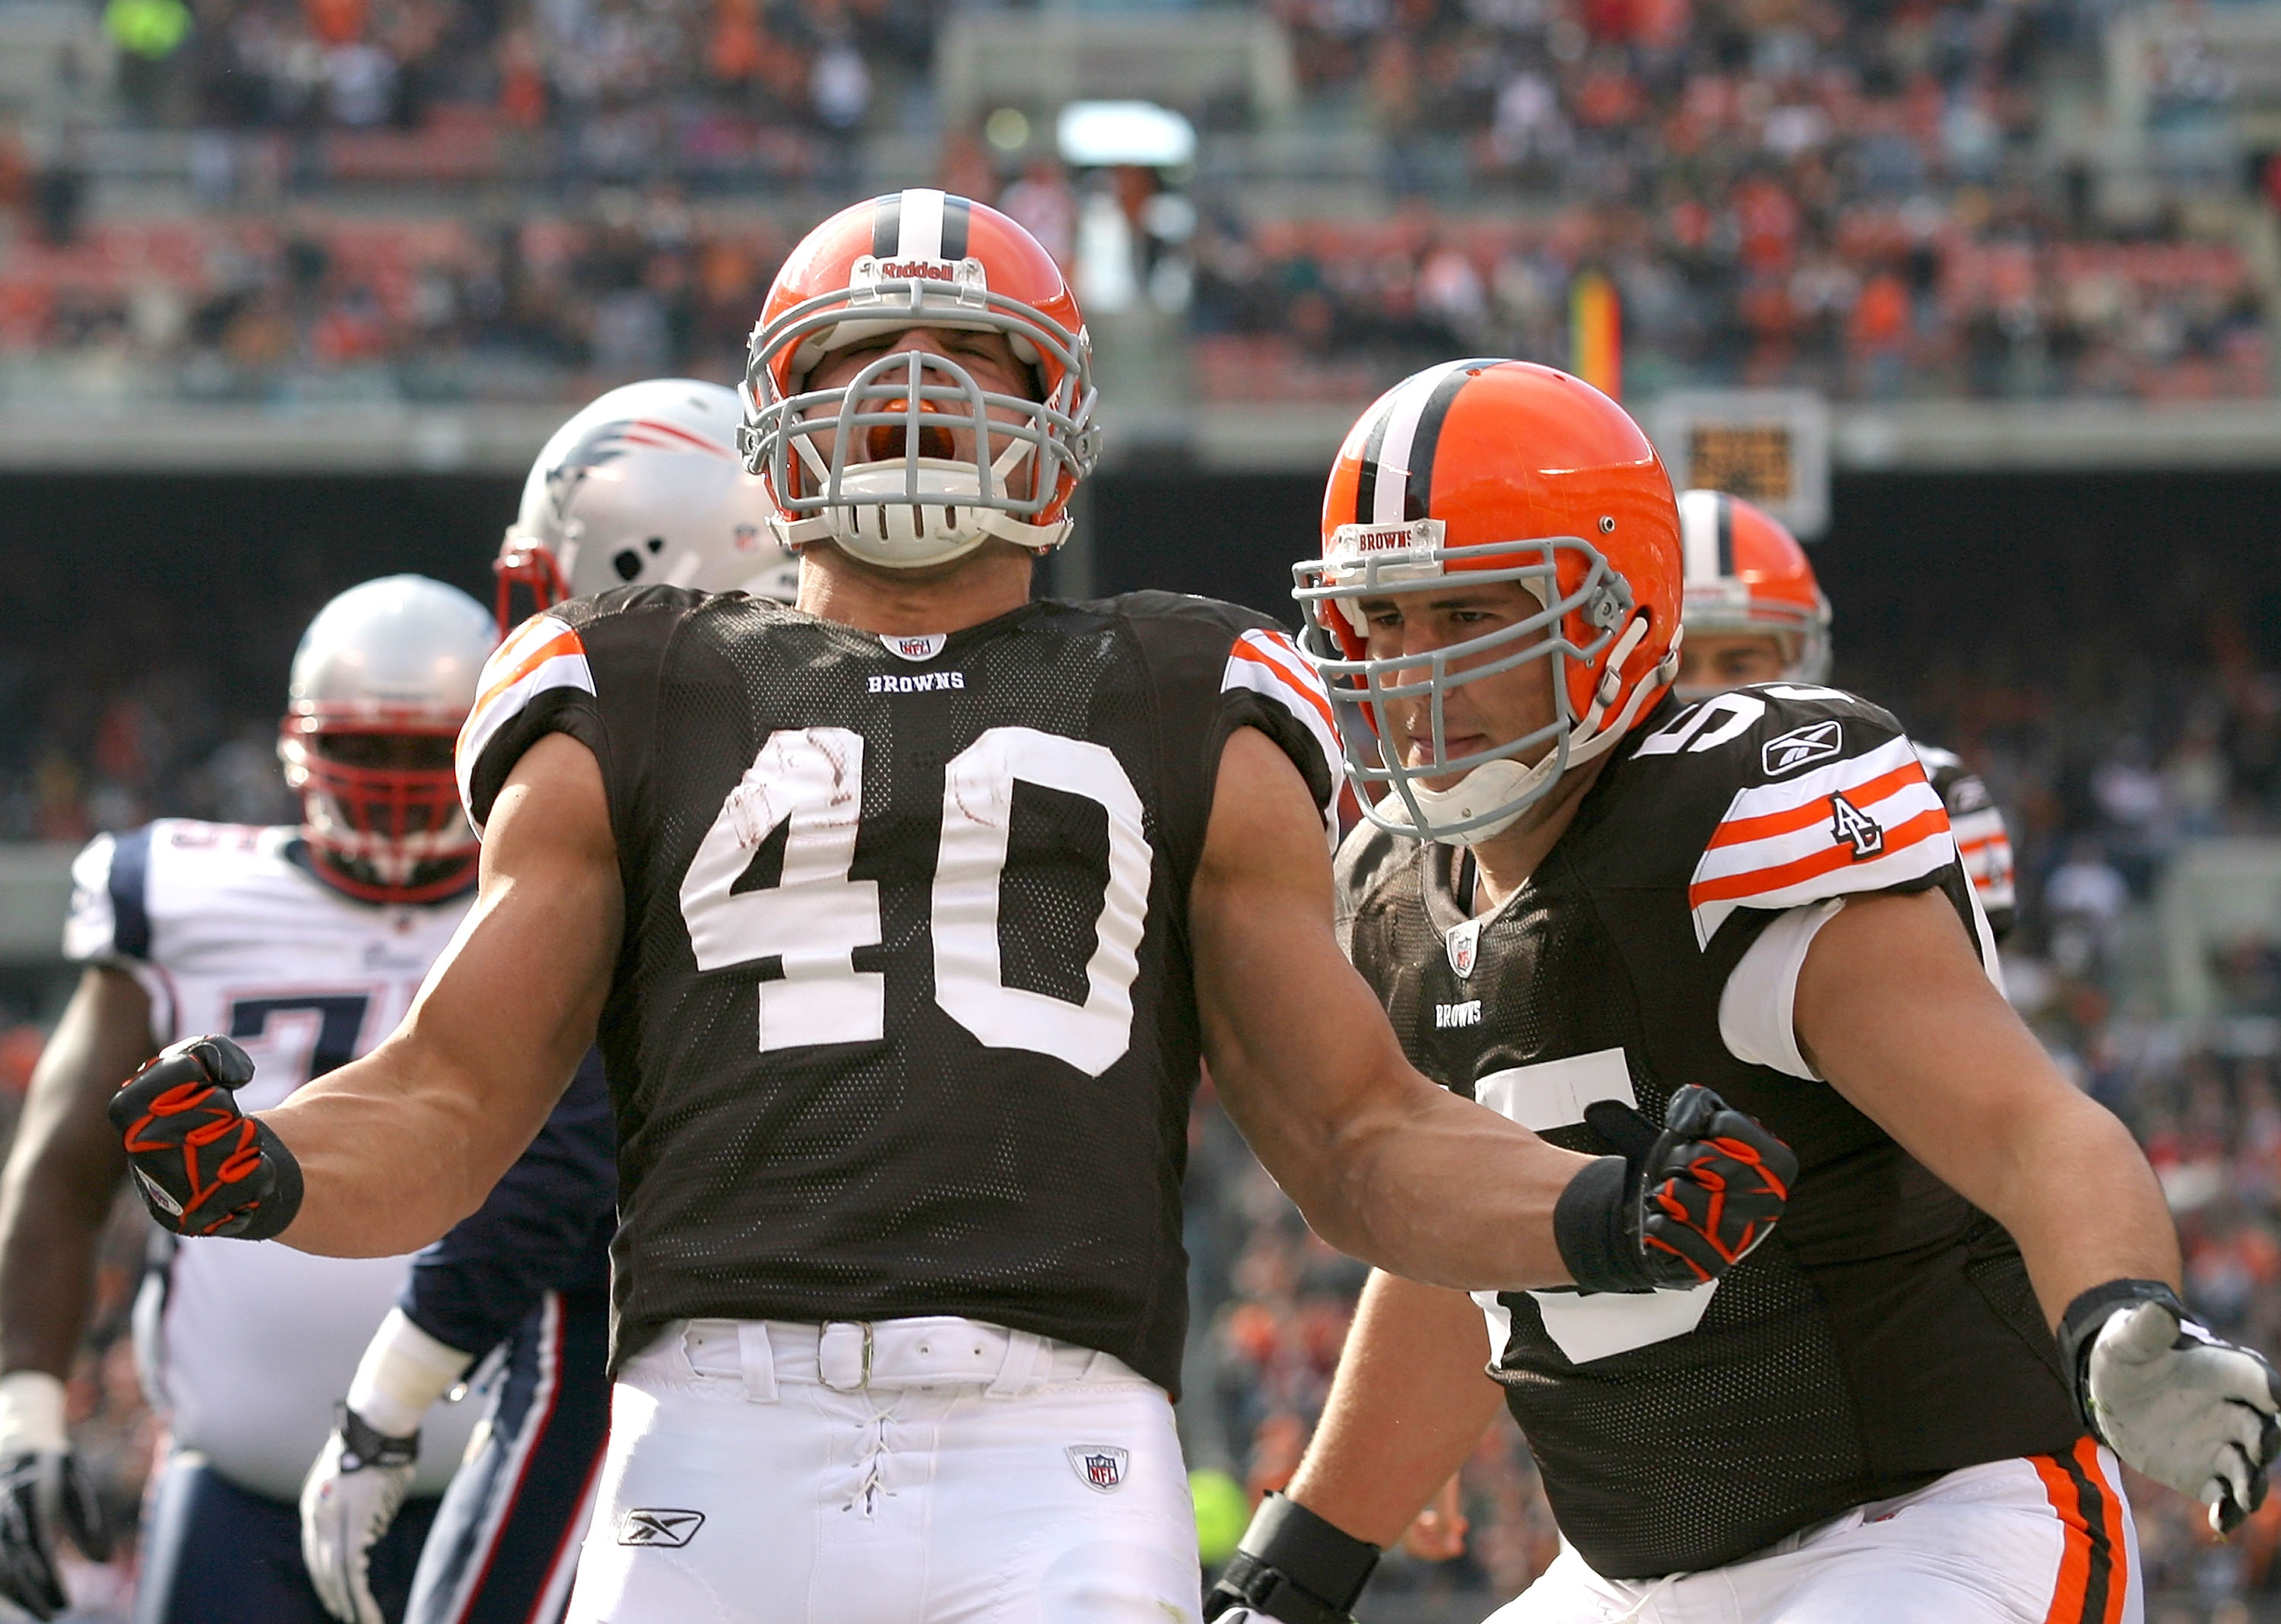 CLEVELAND - NOVEMBER 07:  Running back Peyton Hillis #40 and Alex Mack #55 of the Cleveland Browns celebrate after a touchdown against the New England Patriots at Cleveland Browns Stadium on November 7, 2010 in Cleveland, Ohio.  (Photo by Matt Sullivan/Ge